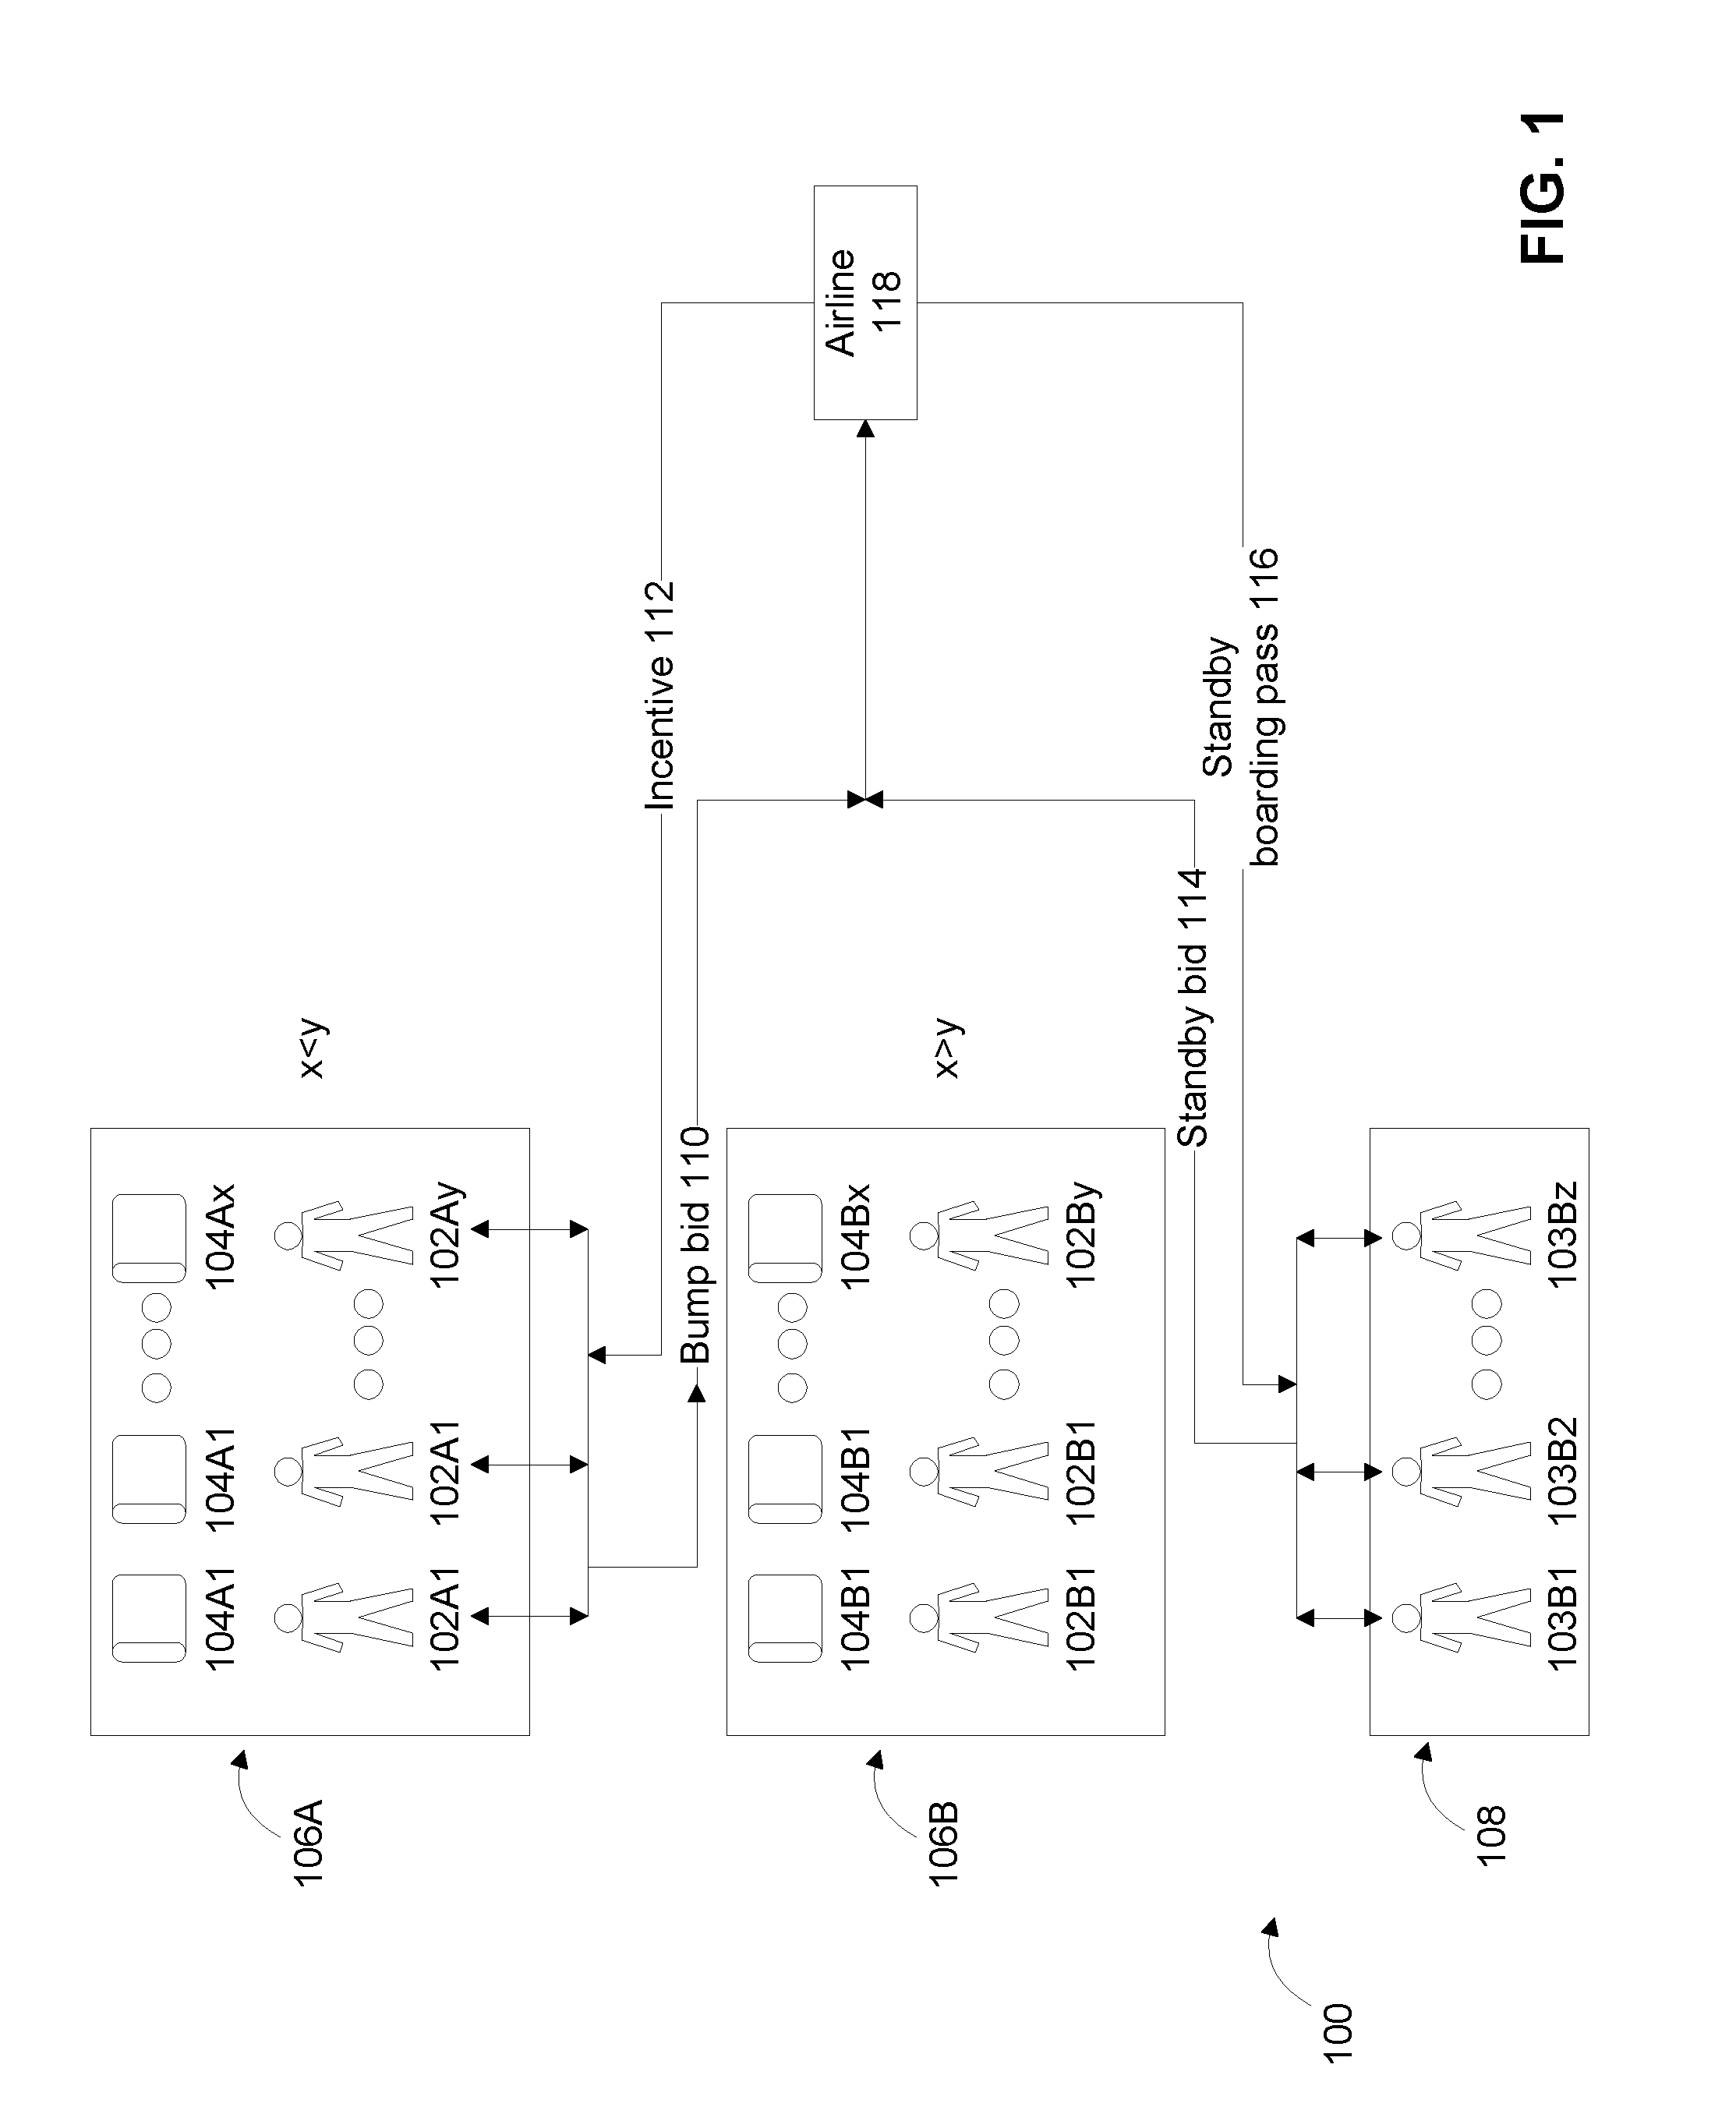 System and method for boarding passengers based on bids